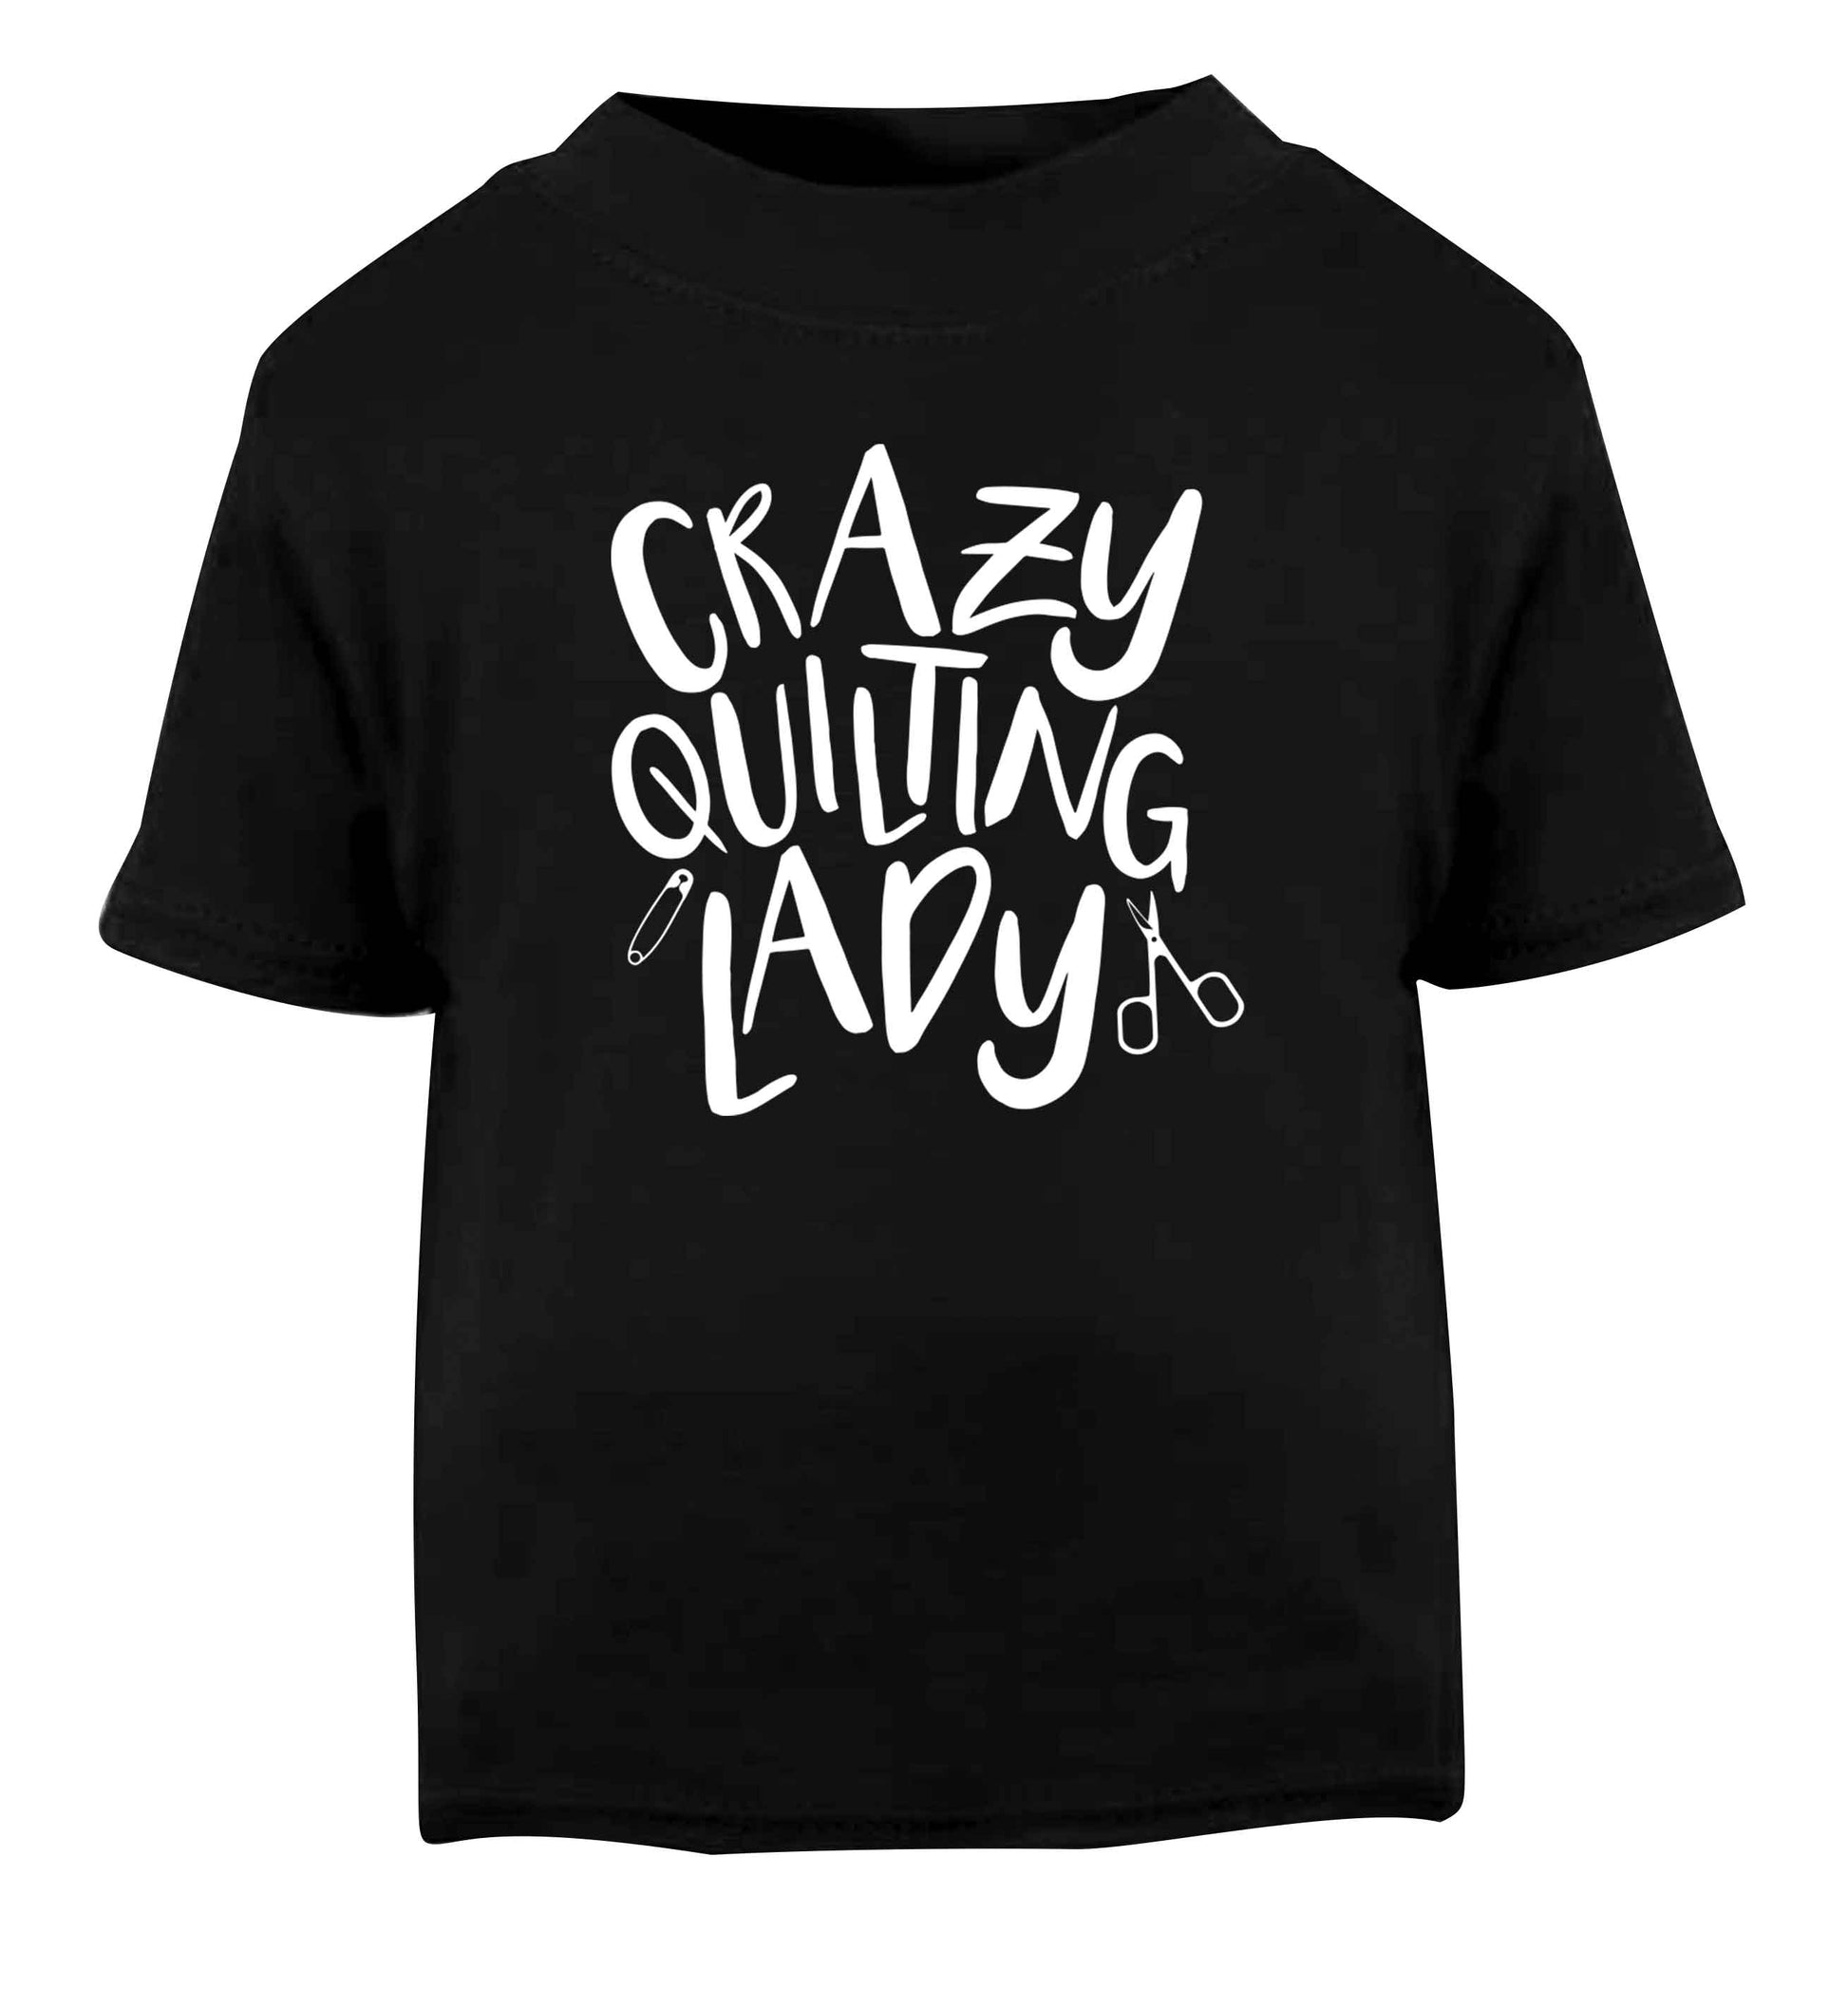 Crazy quilting lady Black Baby Toddler Tshirt 2 years